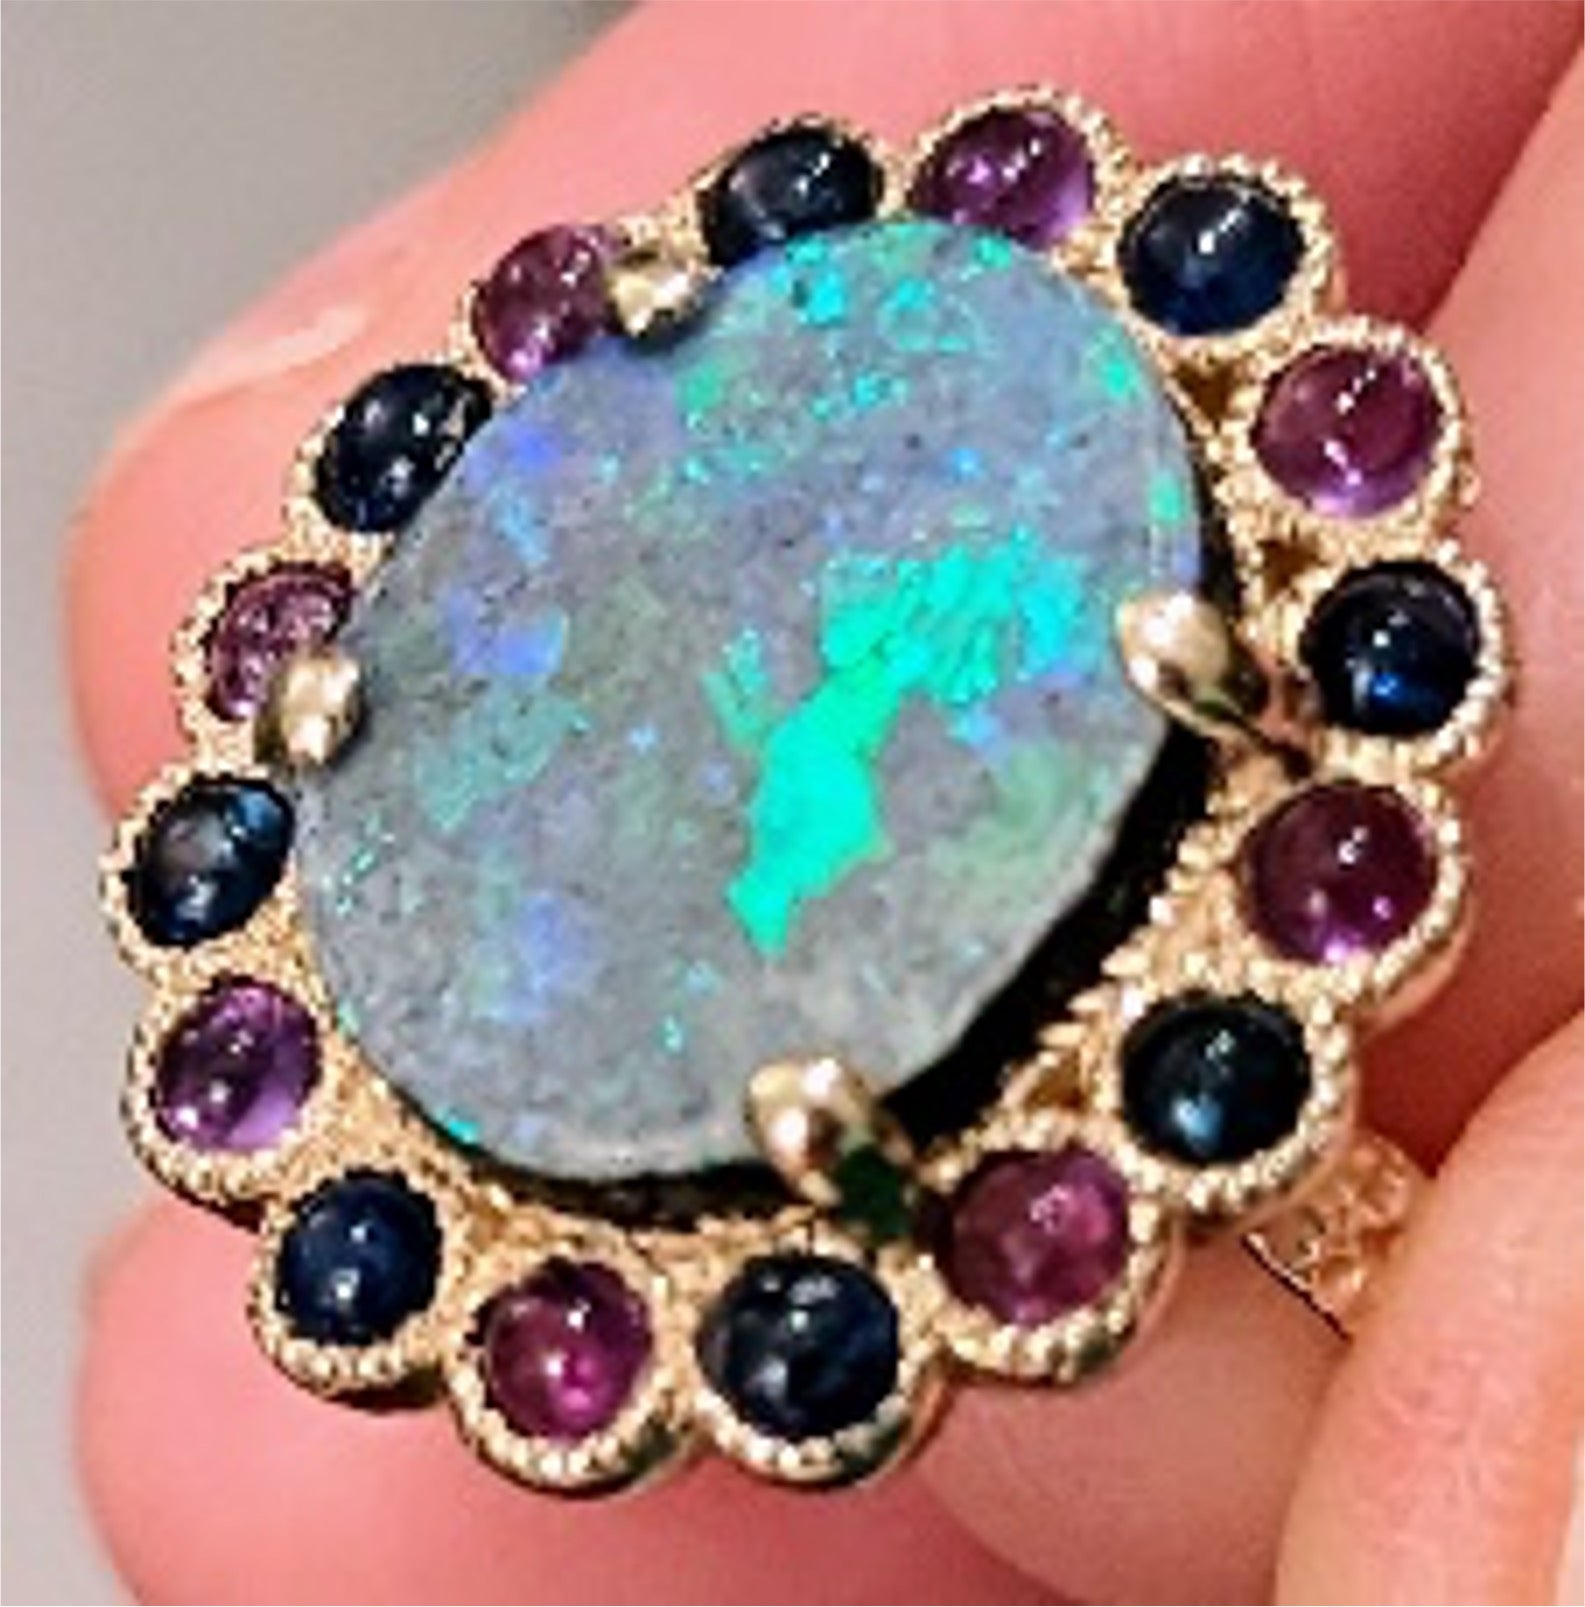 Boulder Opal Ring by Martha Seely available at Talisman Collection Fine Jewelers in El Dorado Hills, CA and online. Stats: Talk about making a statement! This one-of-a-kind ring showcases a 14x12 mm boulder opal surrounded by sapphires and amethyst cabochons. A truly spectacular specimen of nature set in 14k gold. Size 7.2 